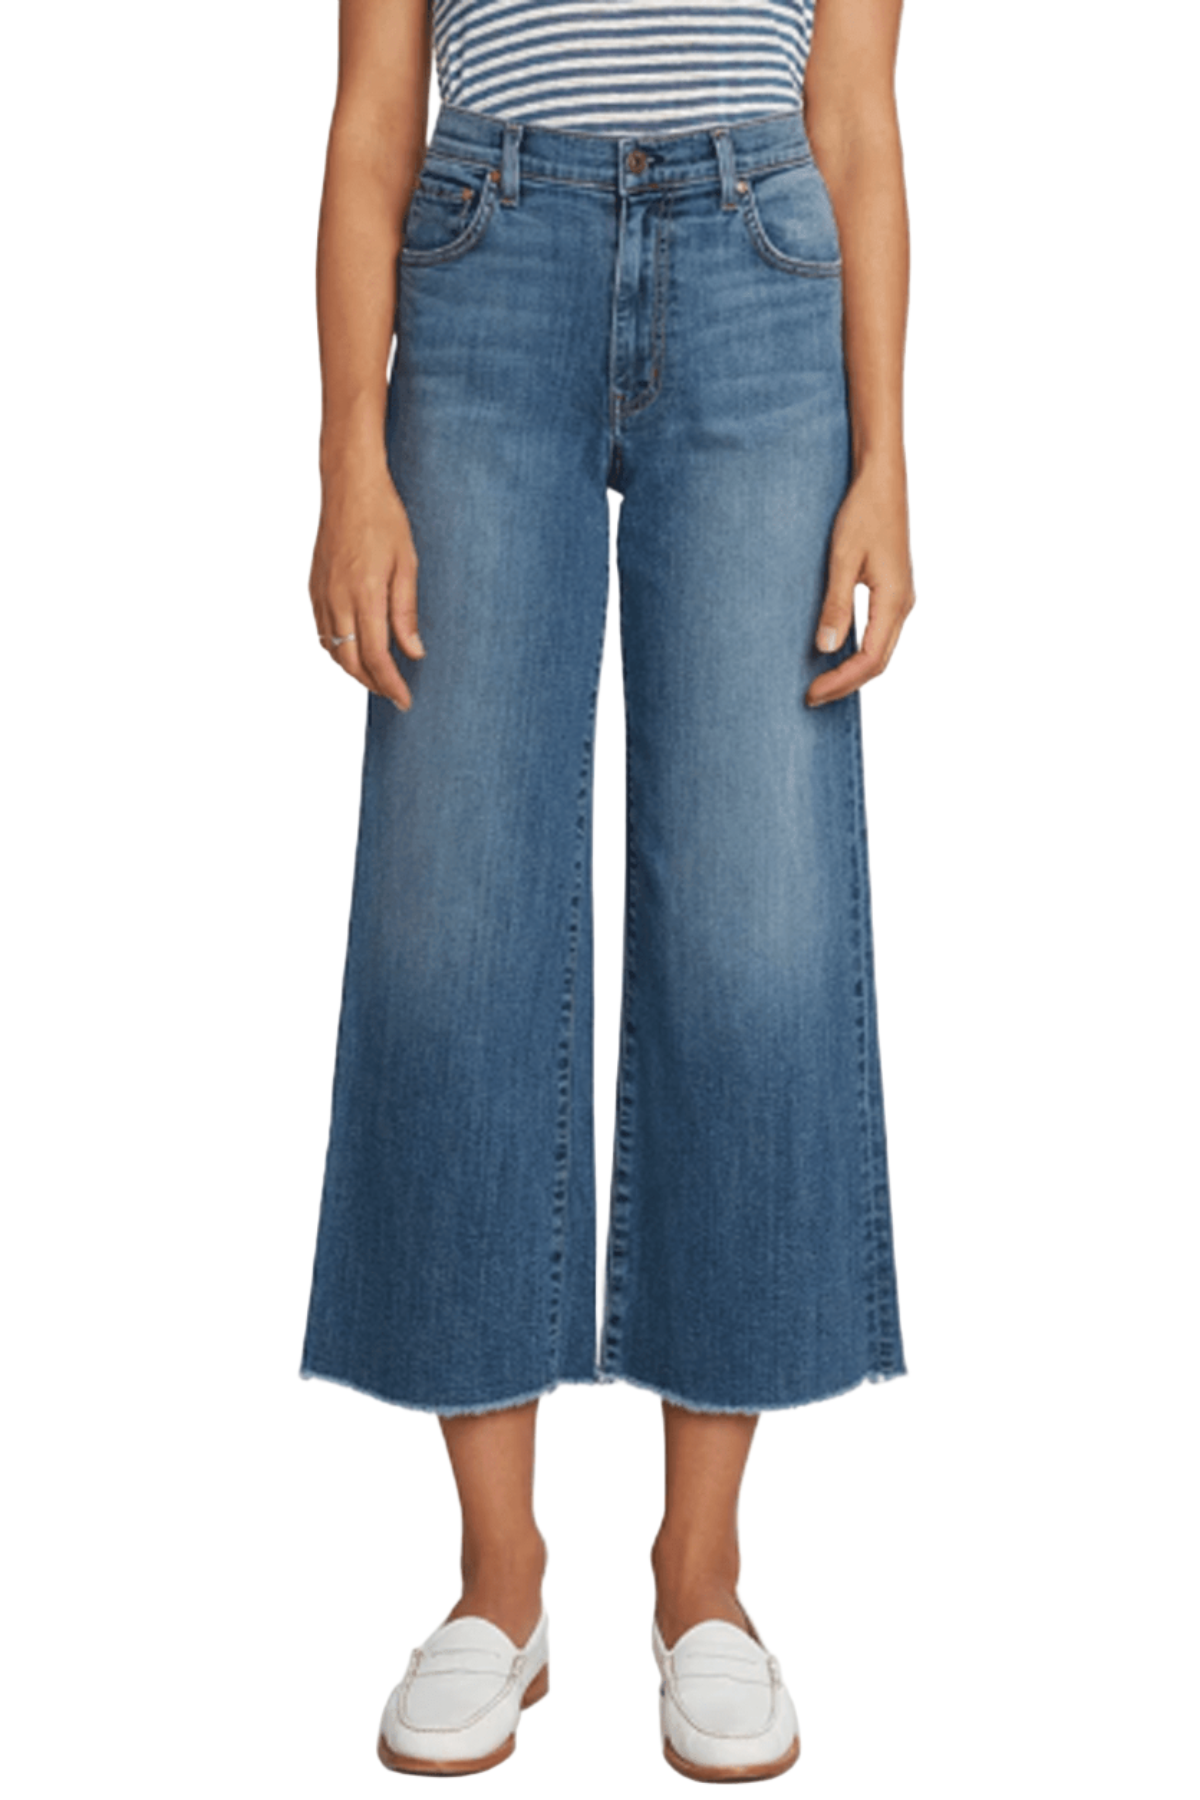 High Rise Nomad Jean with a cropped wide leg in the Medium Turn the Tide Vintage Wash by Principle Denim